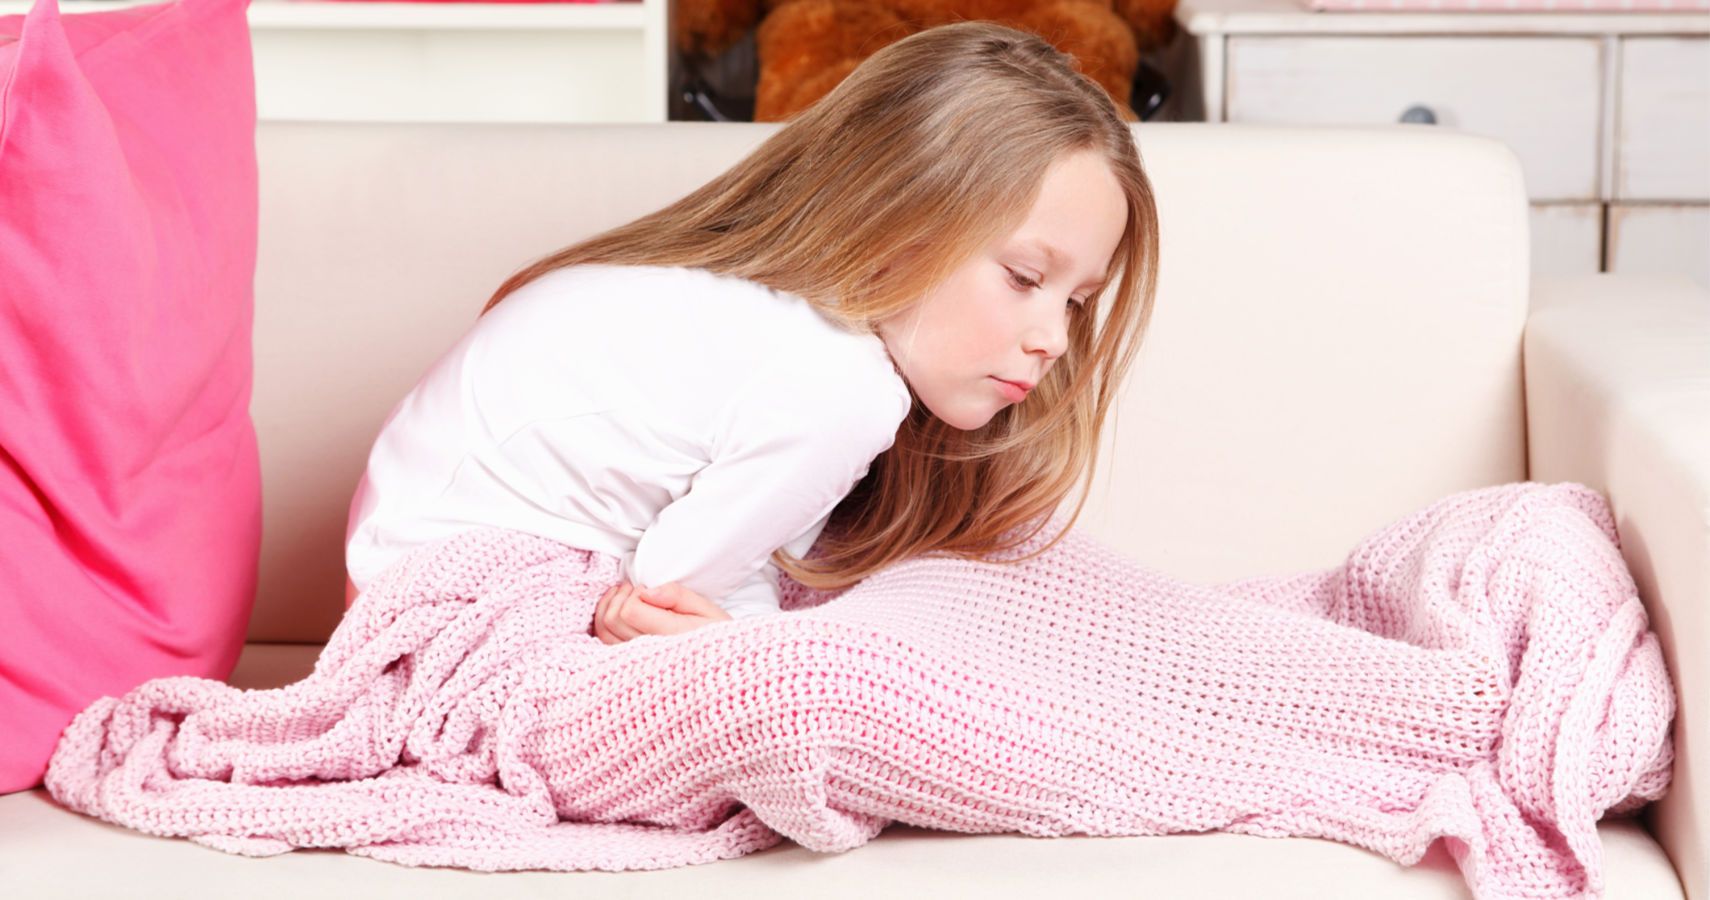 Kids With Anxiety Complain Of Stomach Pain And Headaches ...